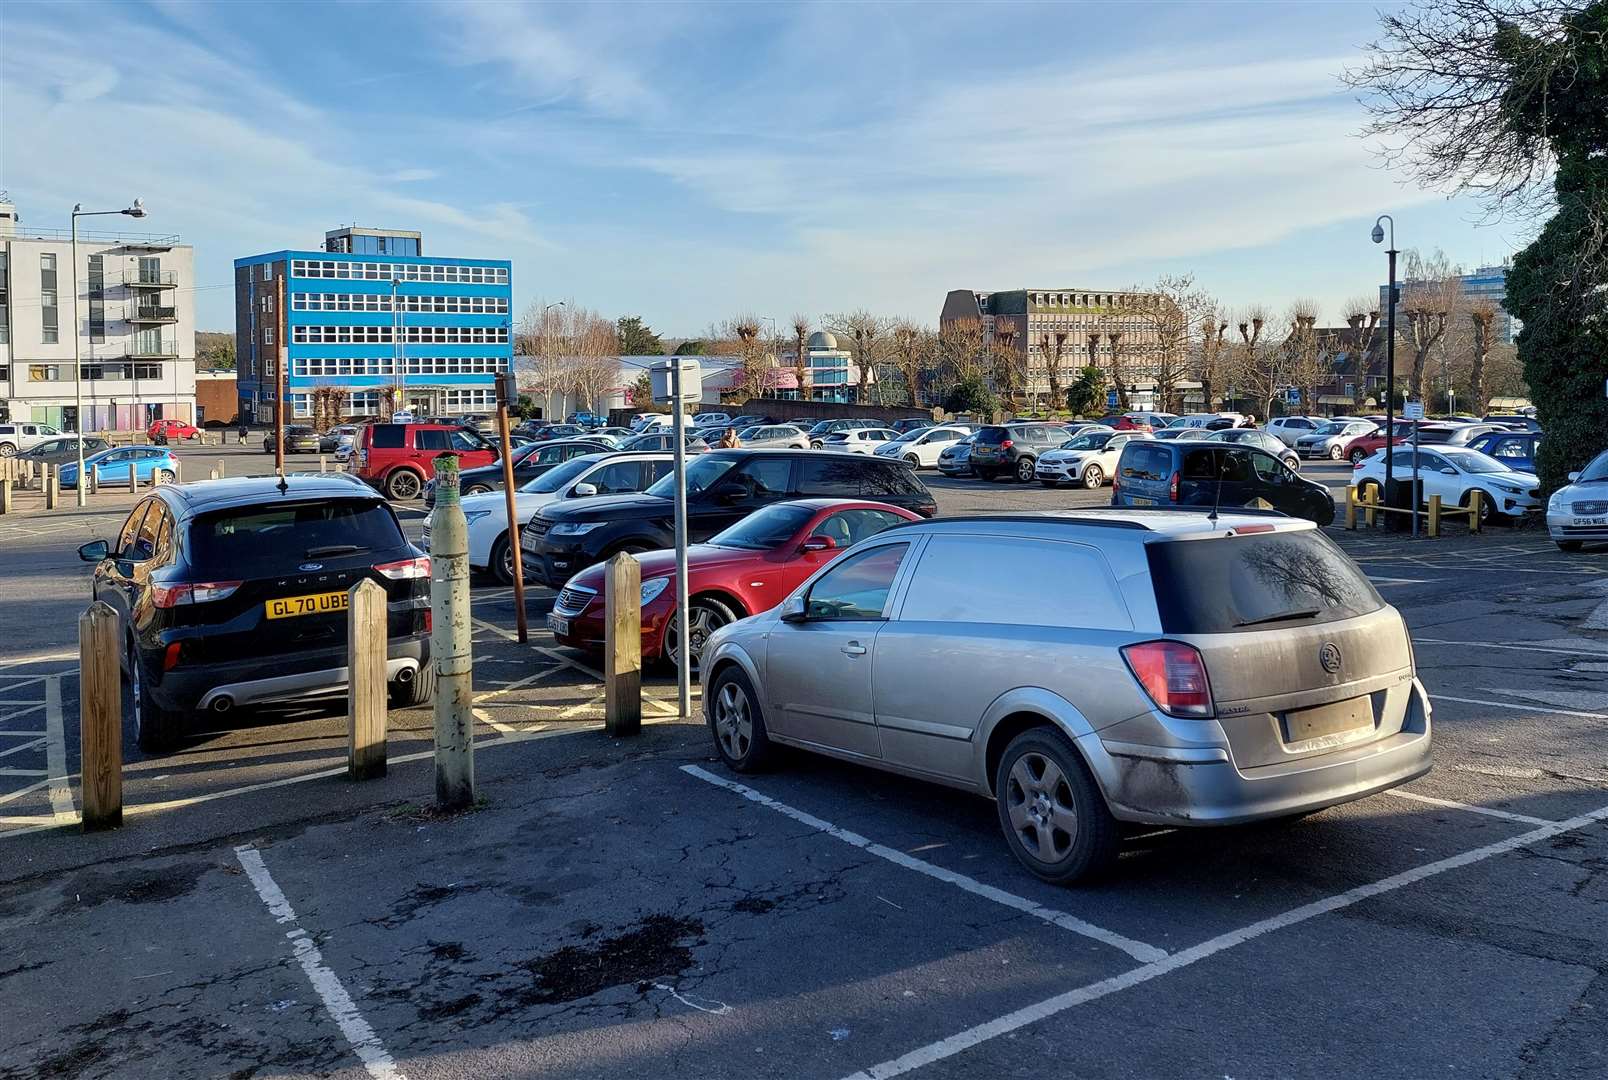 Police believe the car park was busy at the time of the assault